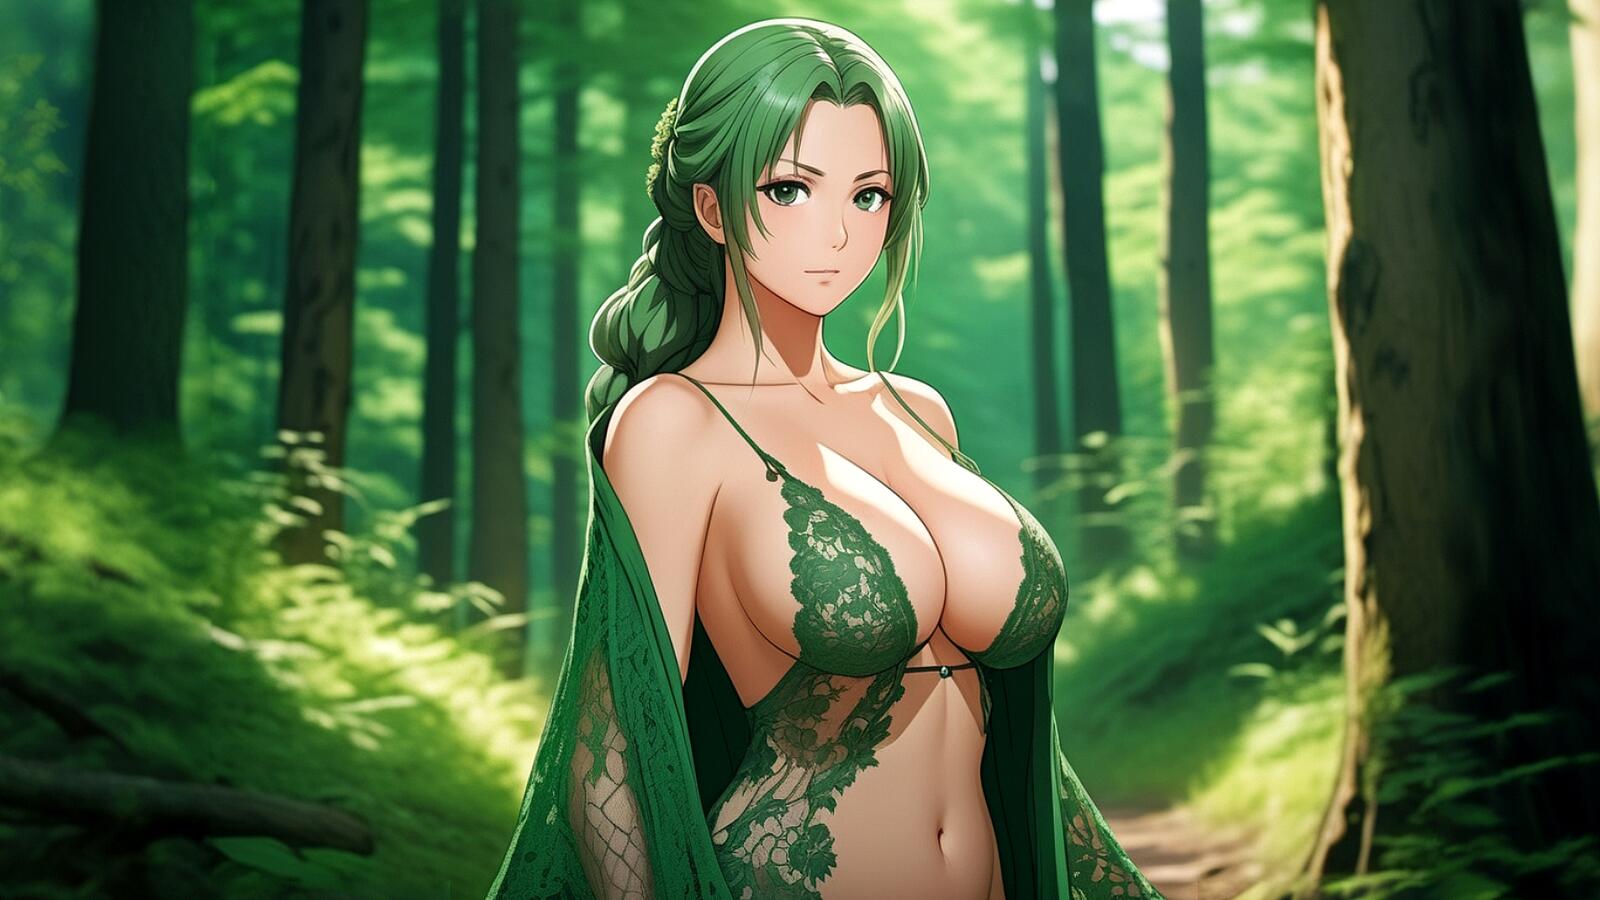 Free photo Girl in green lingerie in the woods